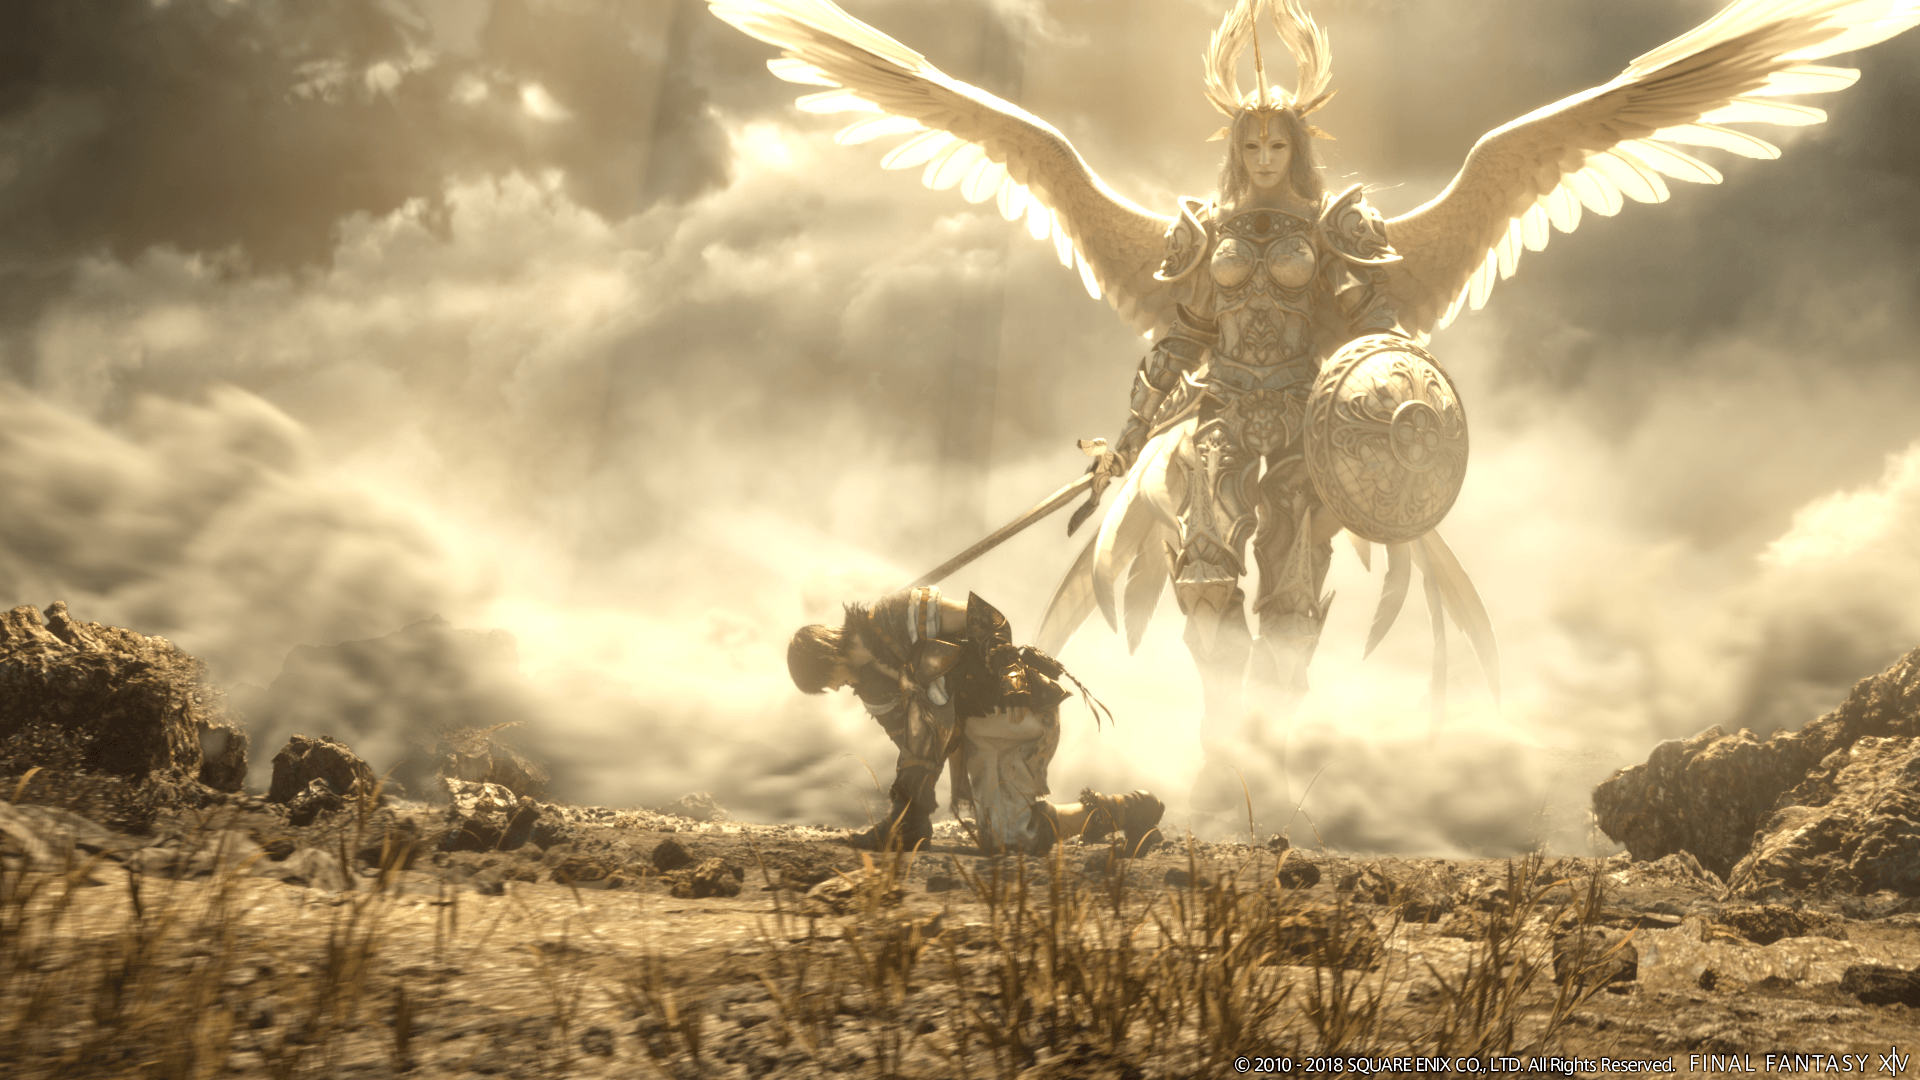 Final Fantasy XIV's third expansion 'Shadowbringers' announced